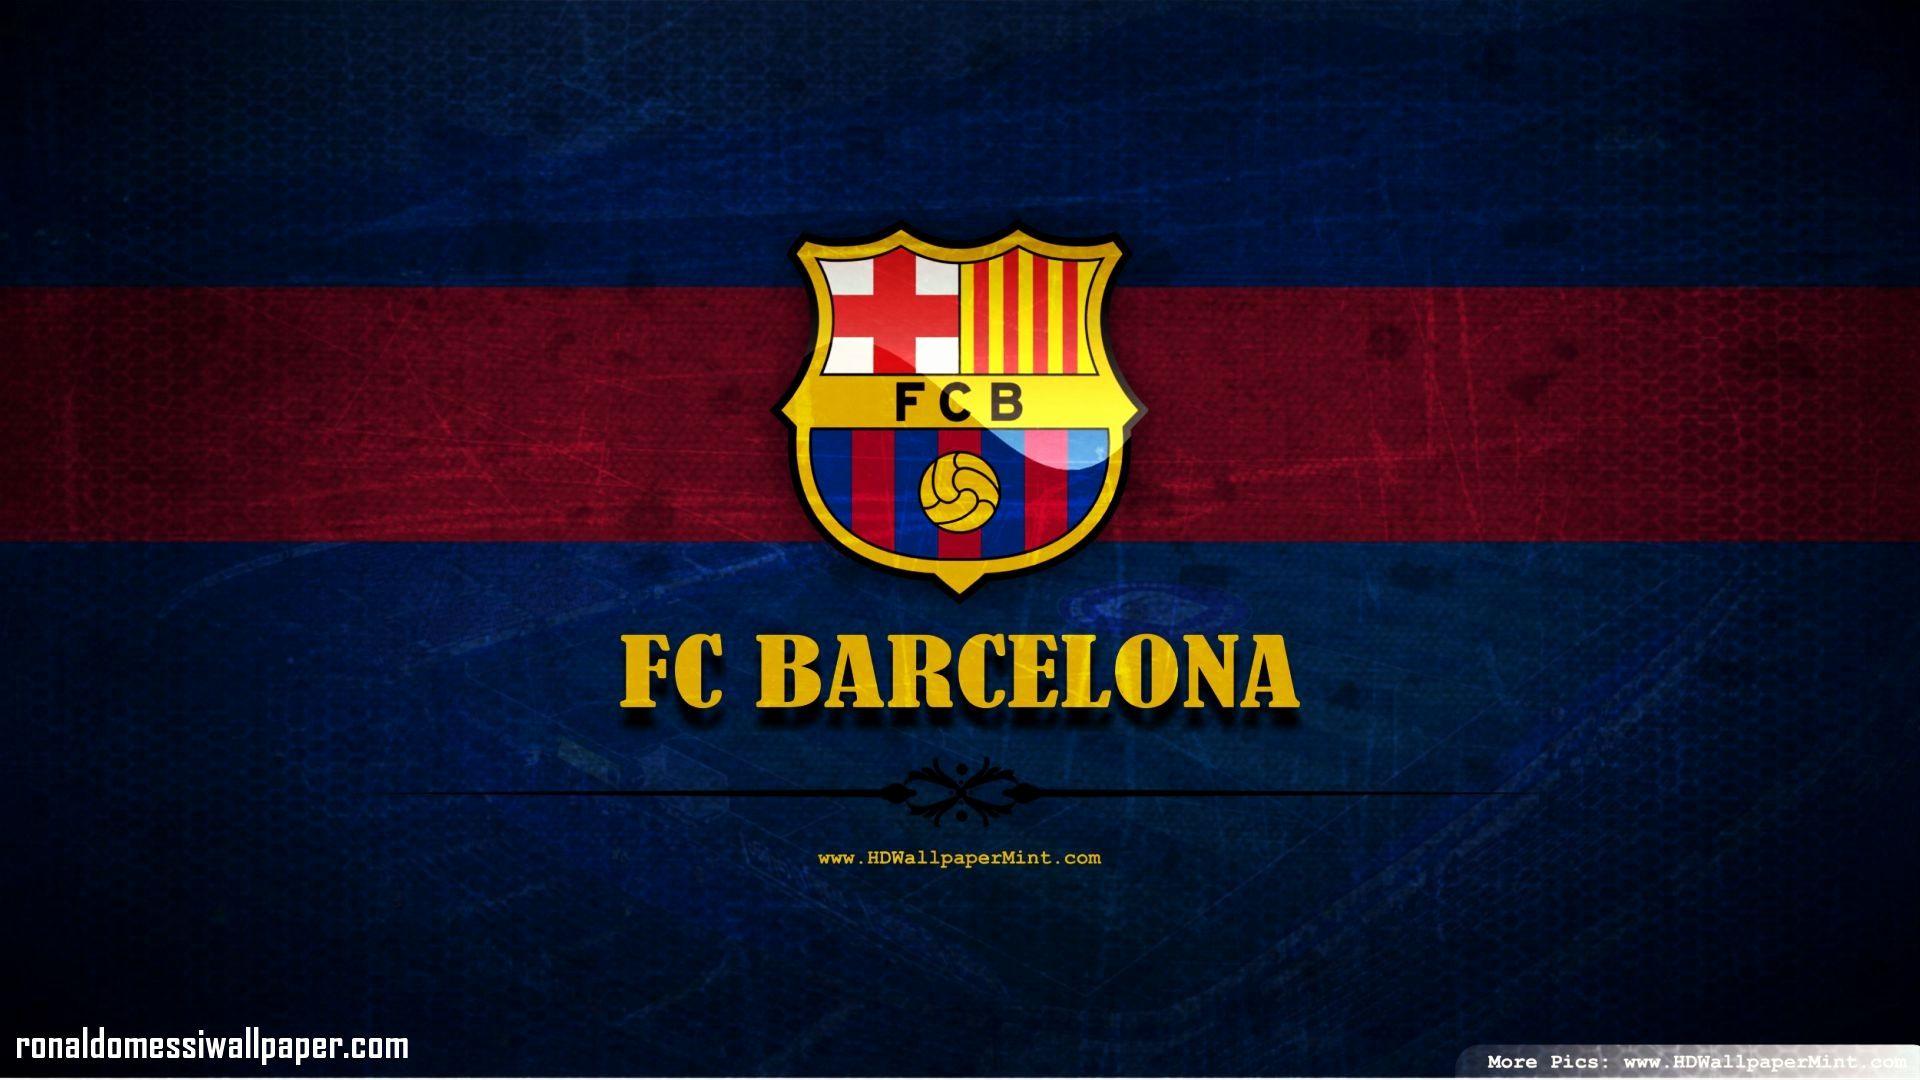 Live Wallpaper for iPhone Awesome Fc Barcelona Live Wallpaper